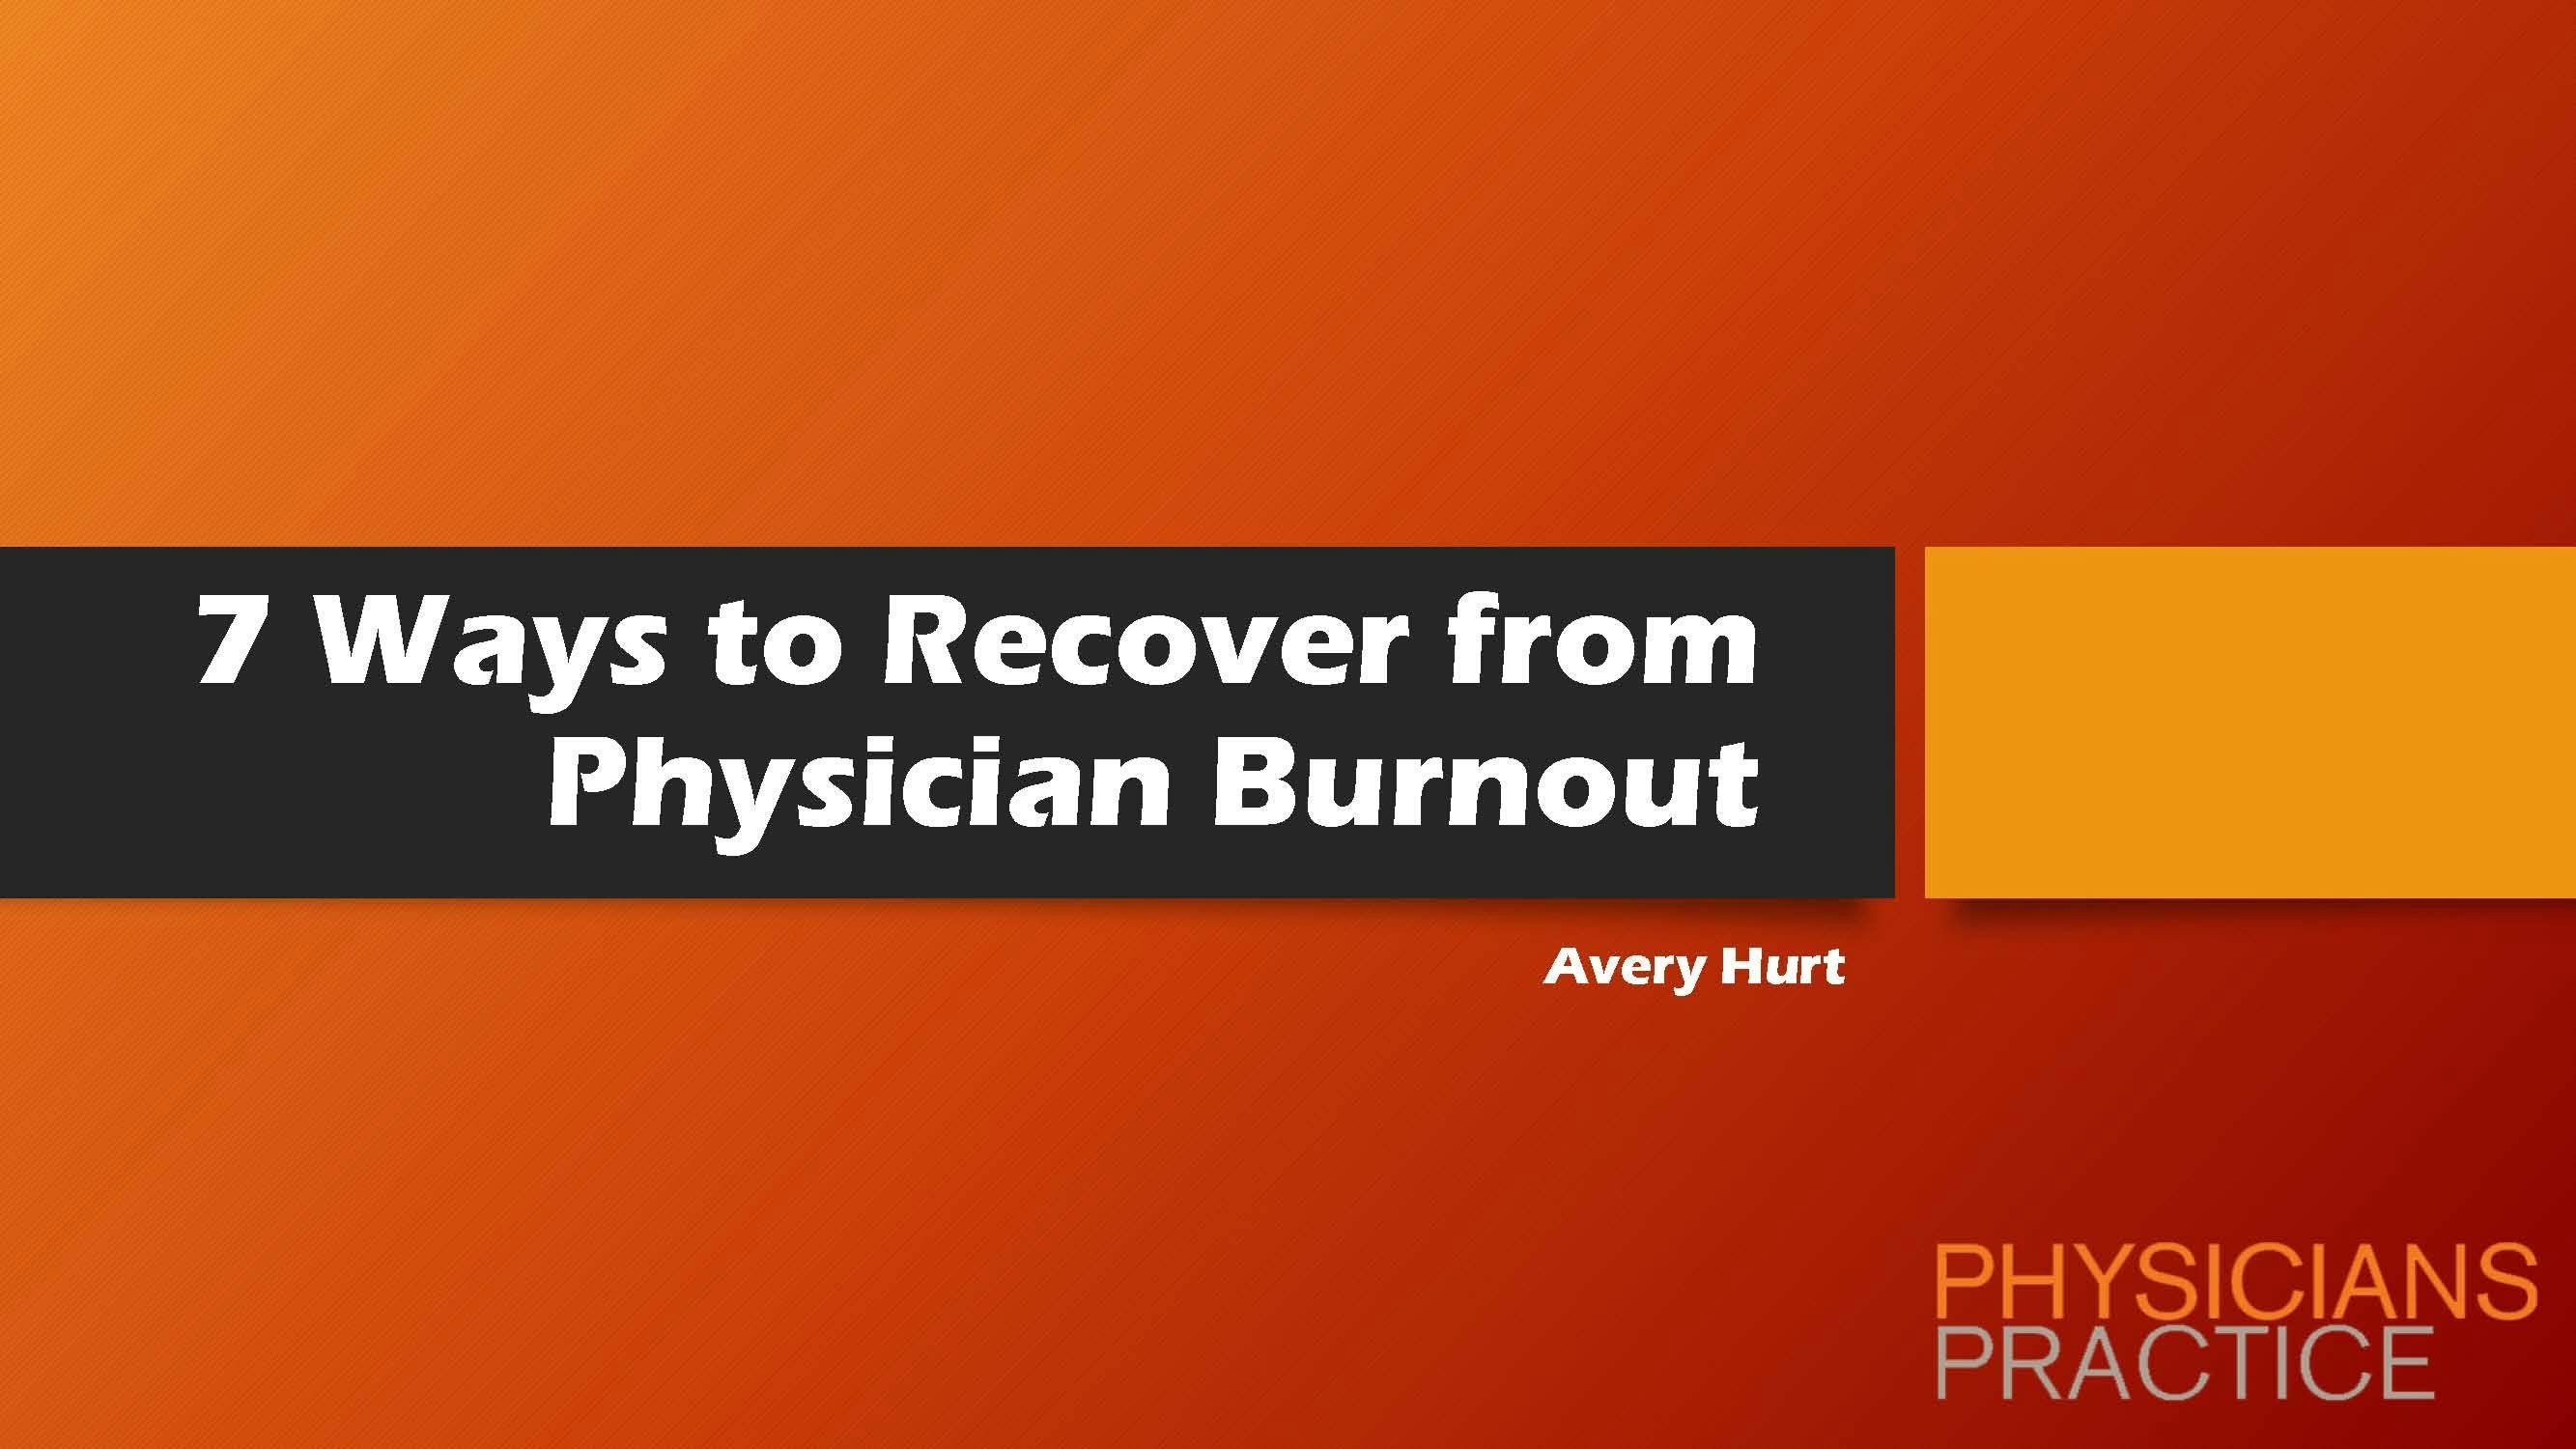 7 Ways to Recover from Physician Burnout 